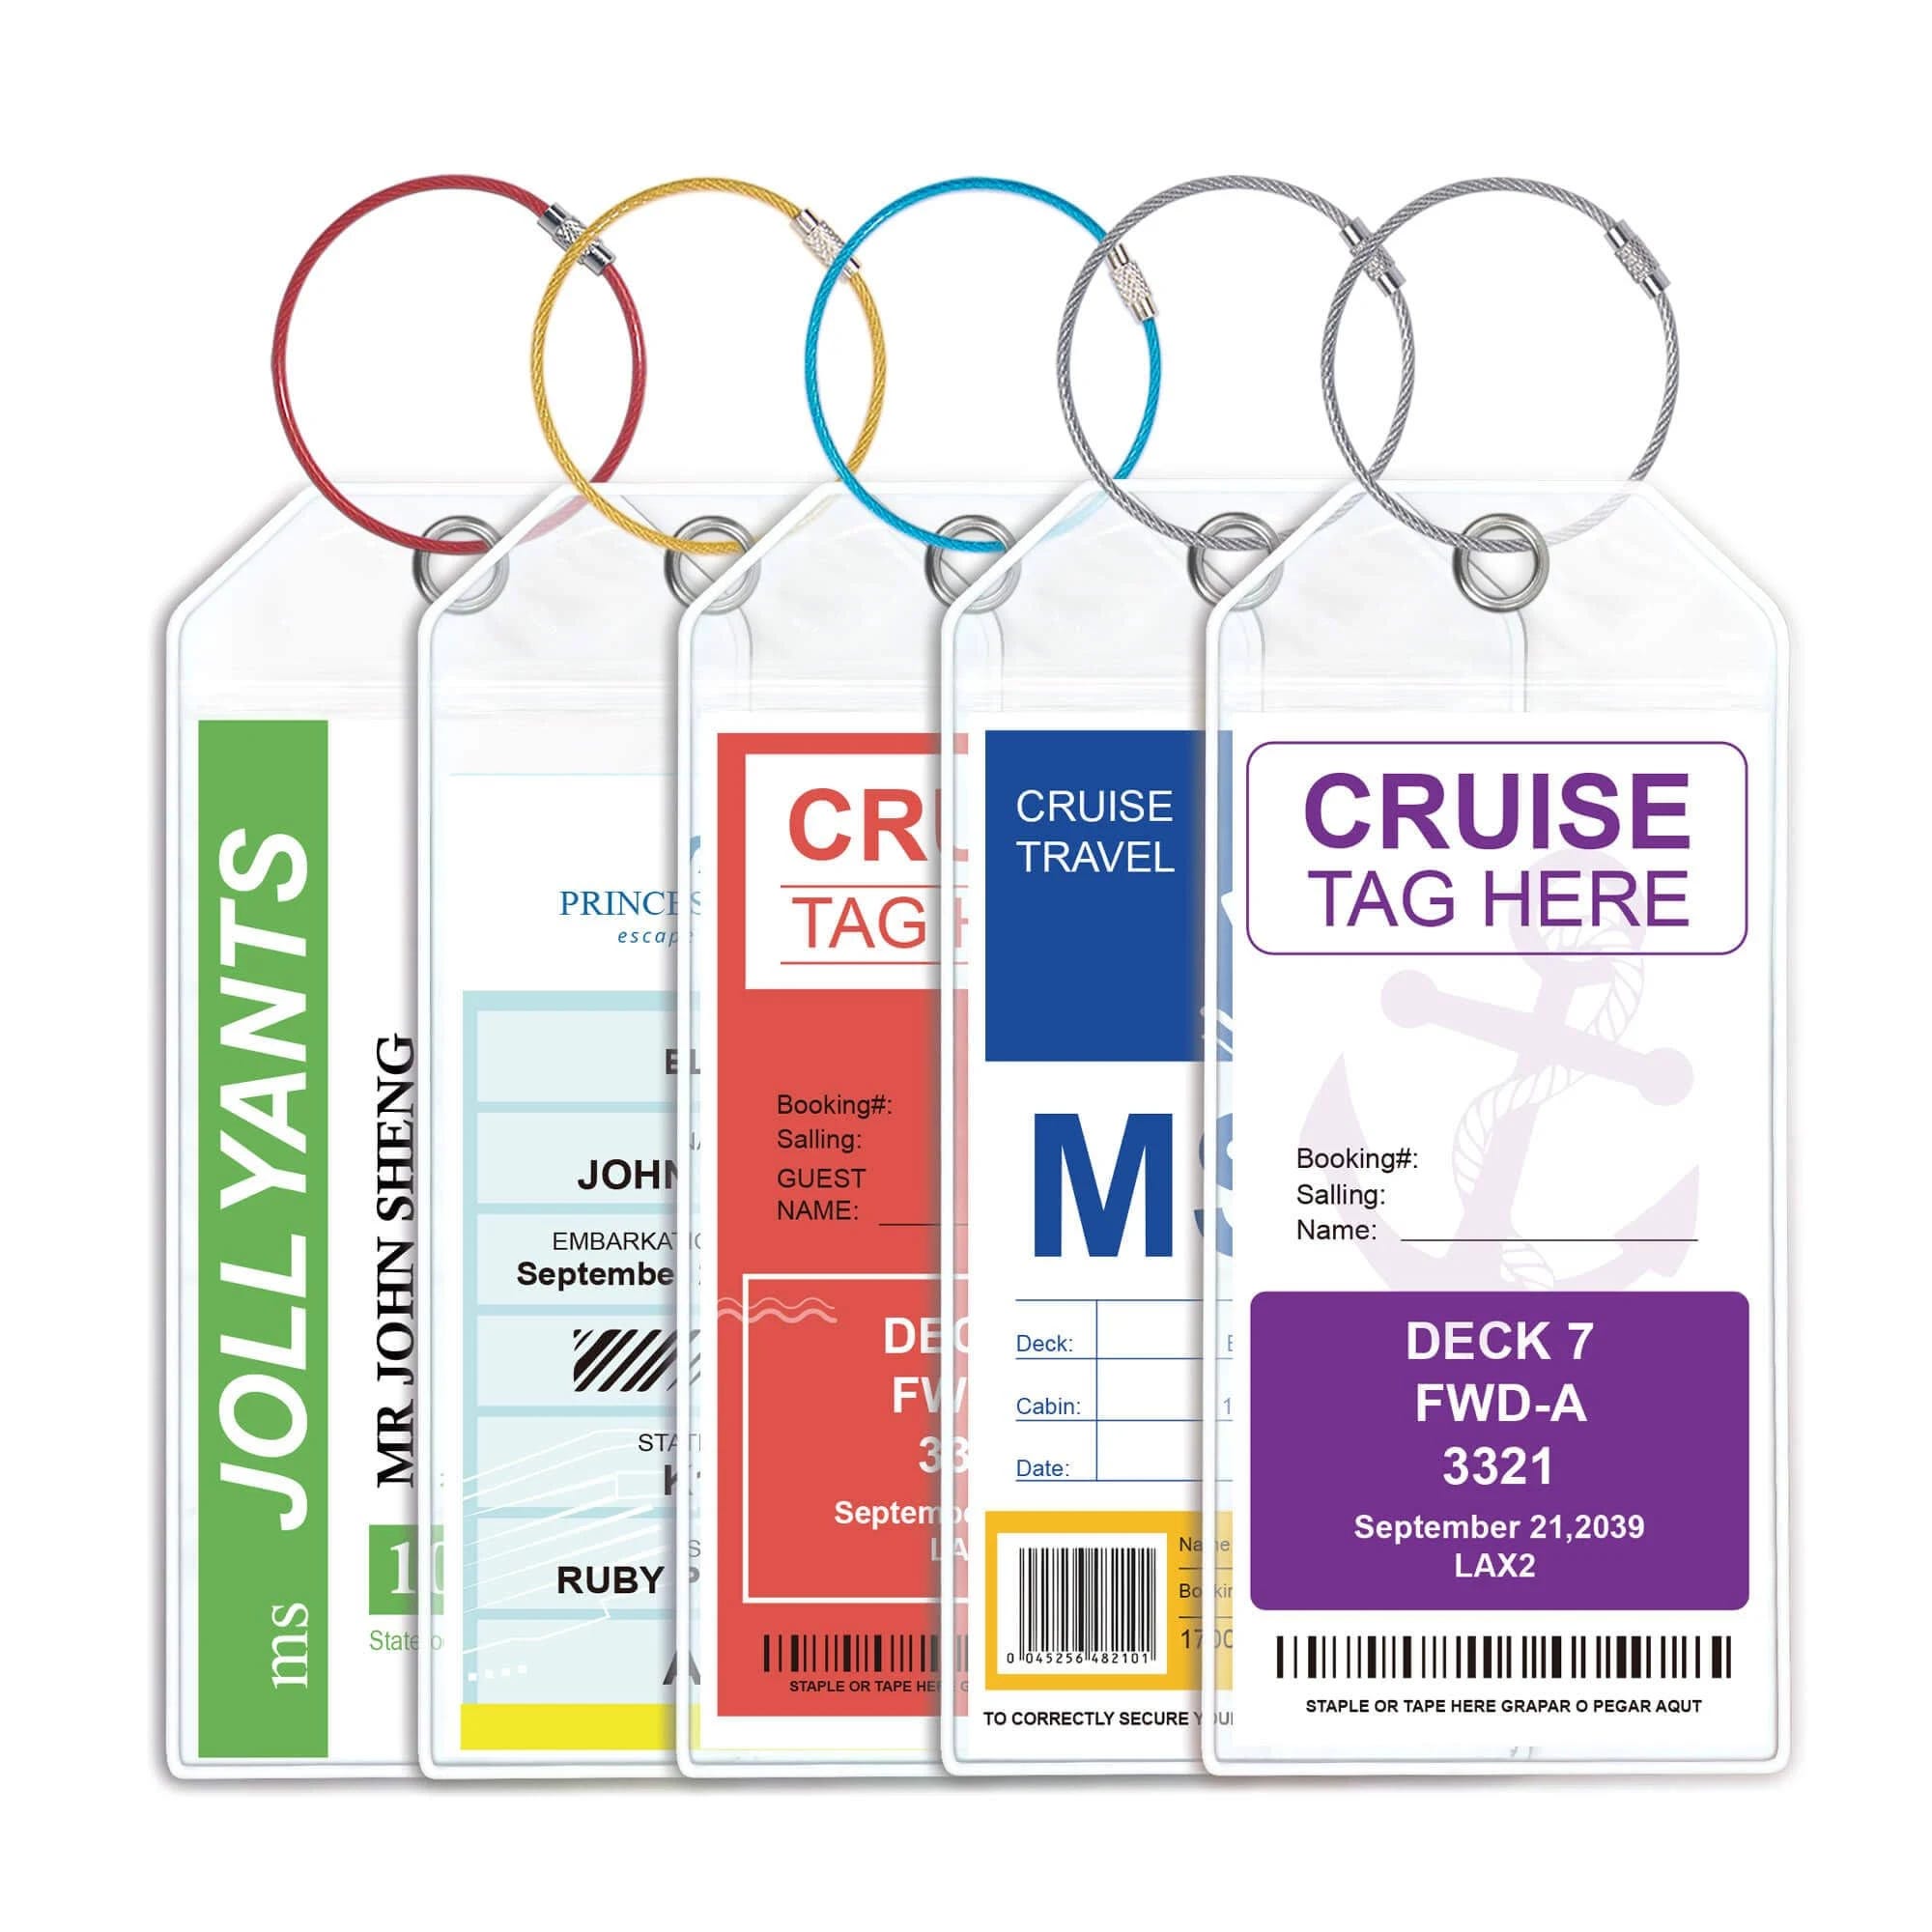 Wide Cruise Luggage Tags for Easy Pass Management | Image